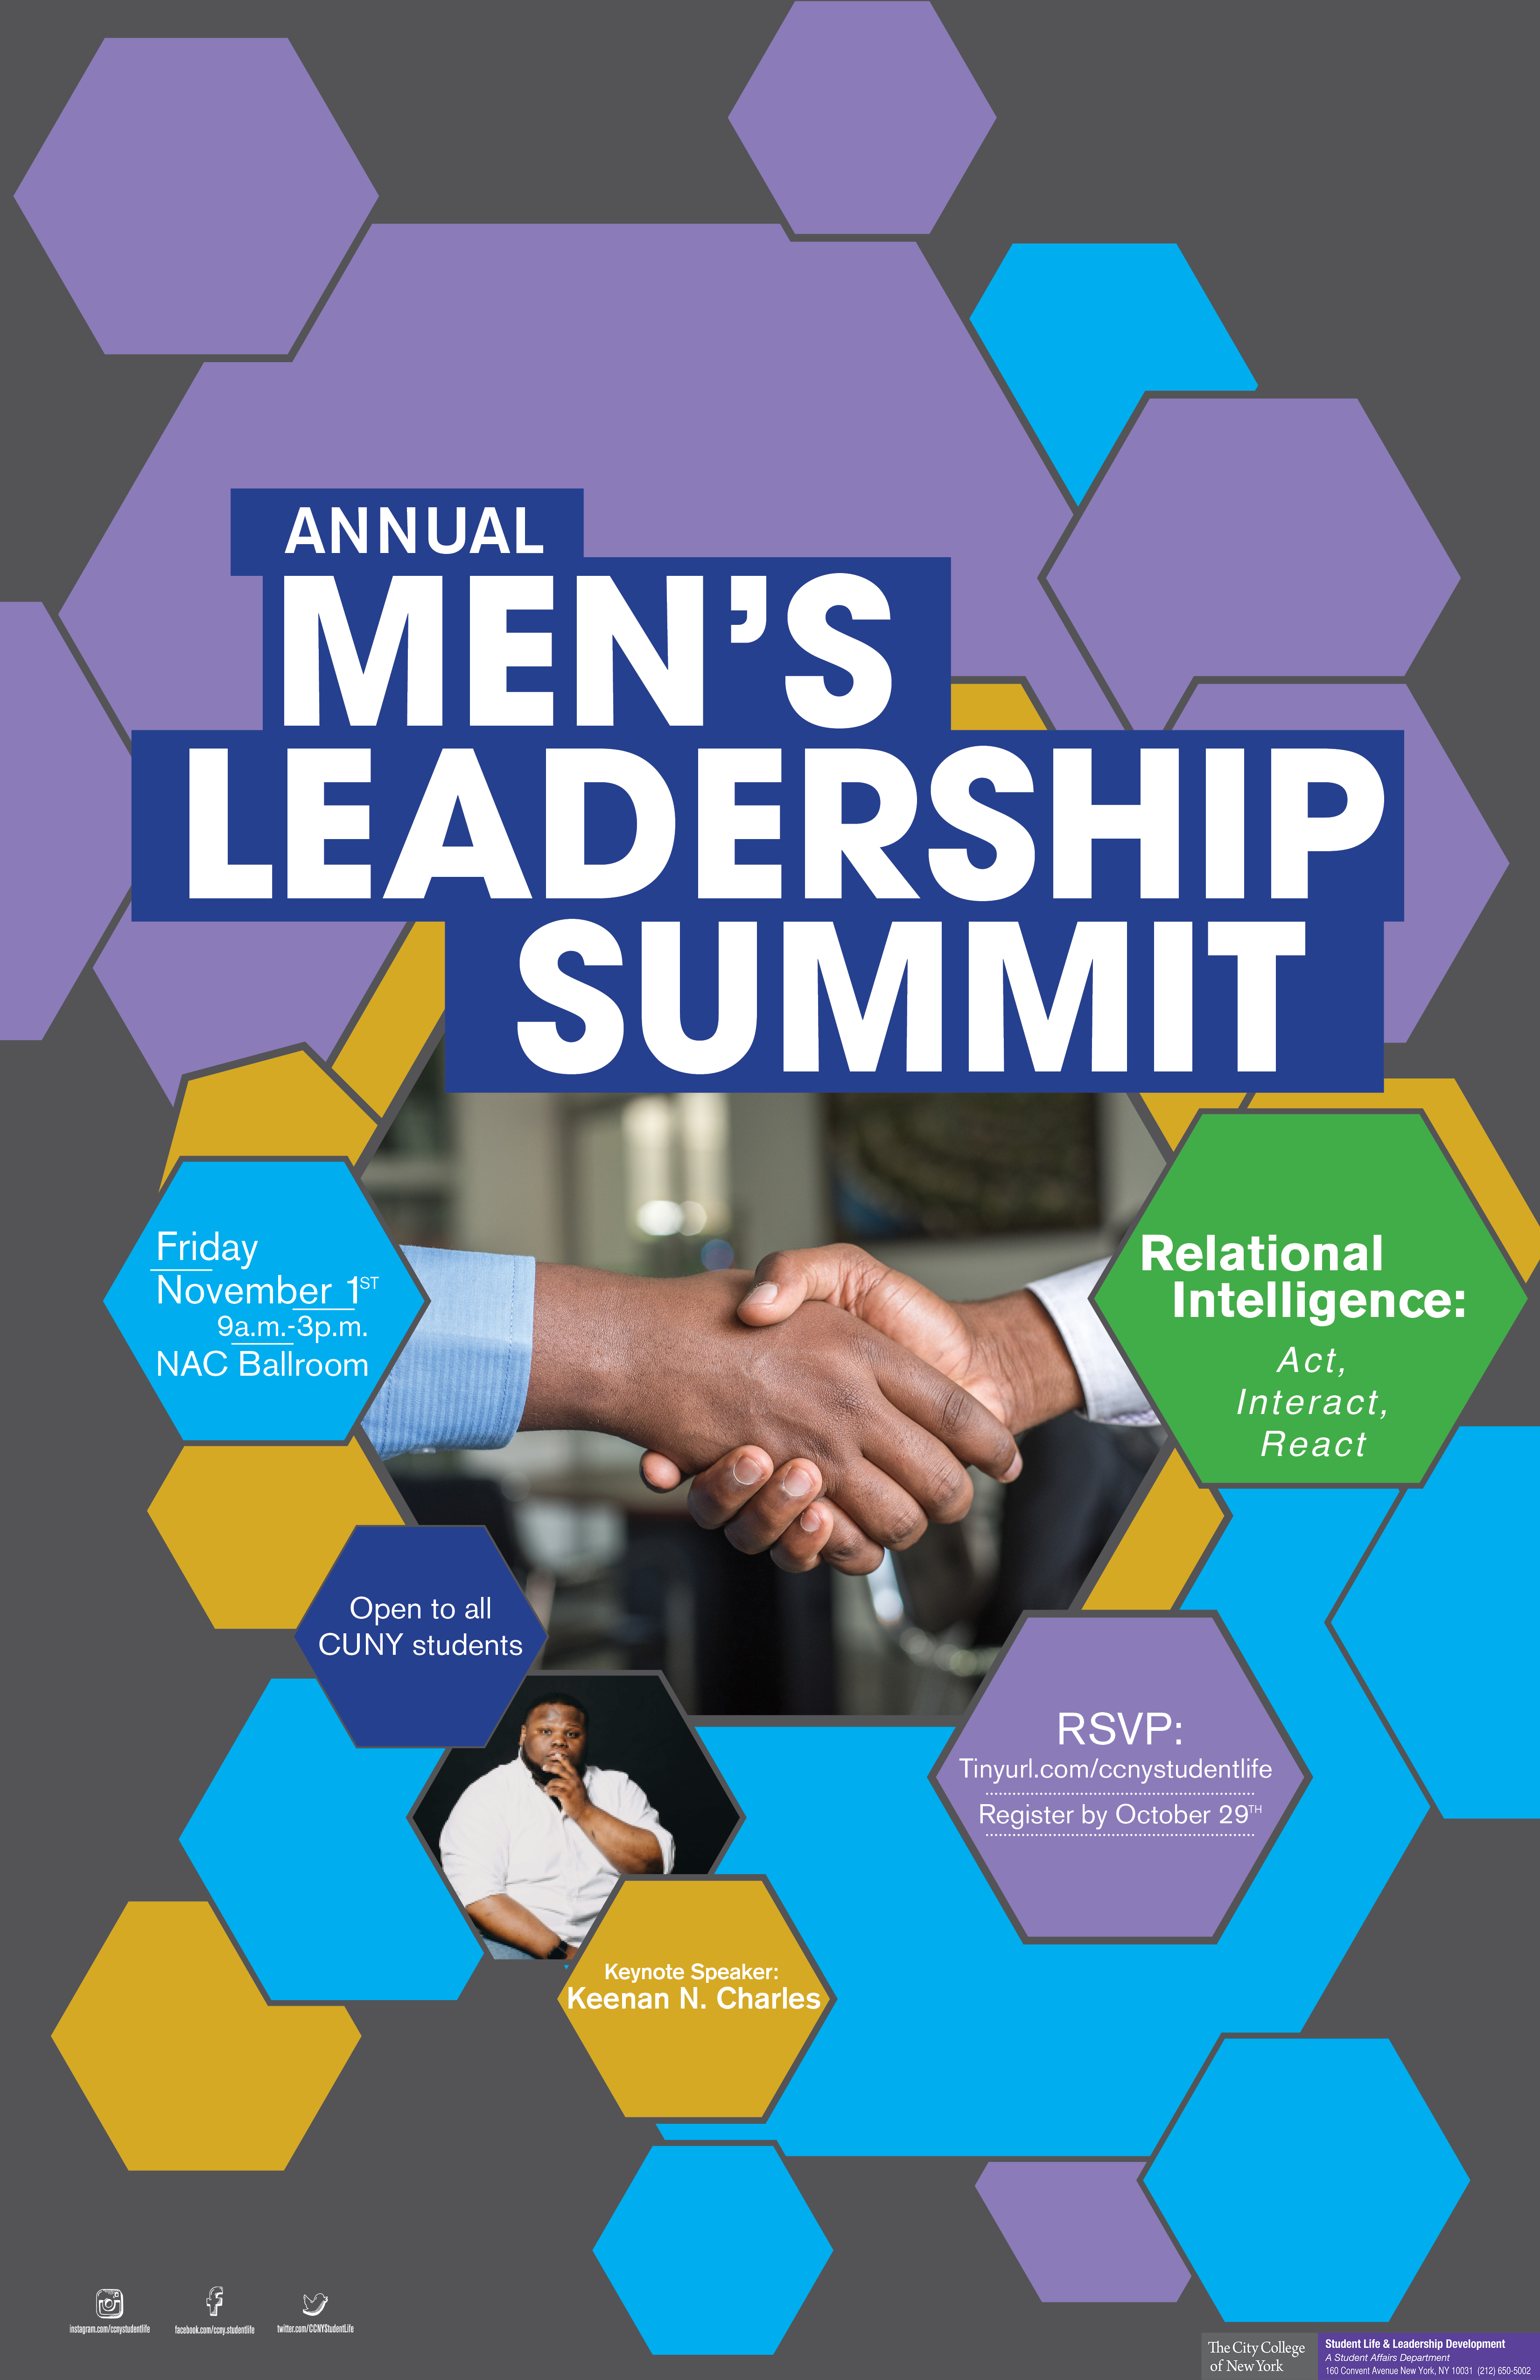 Annual Men's Leadership Summit - RSVP by October 29th - tinyurl.com/ccnystudentlife - Open to all CUNY students